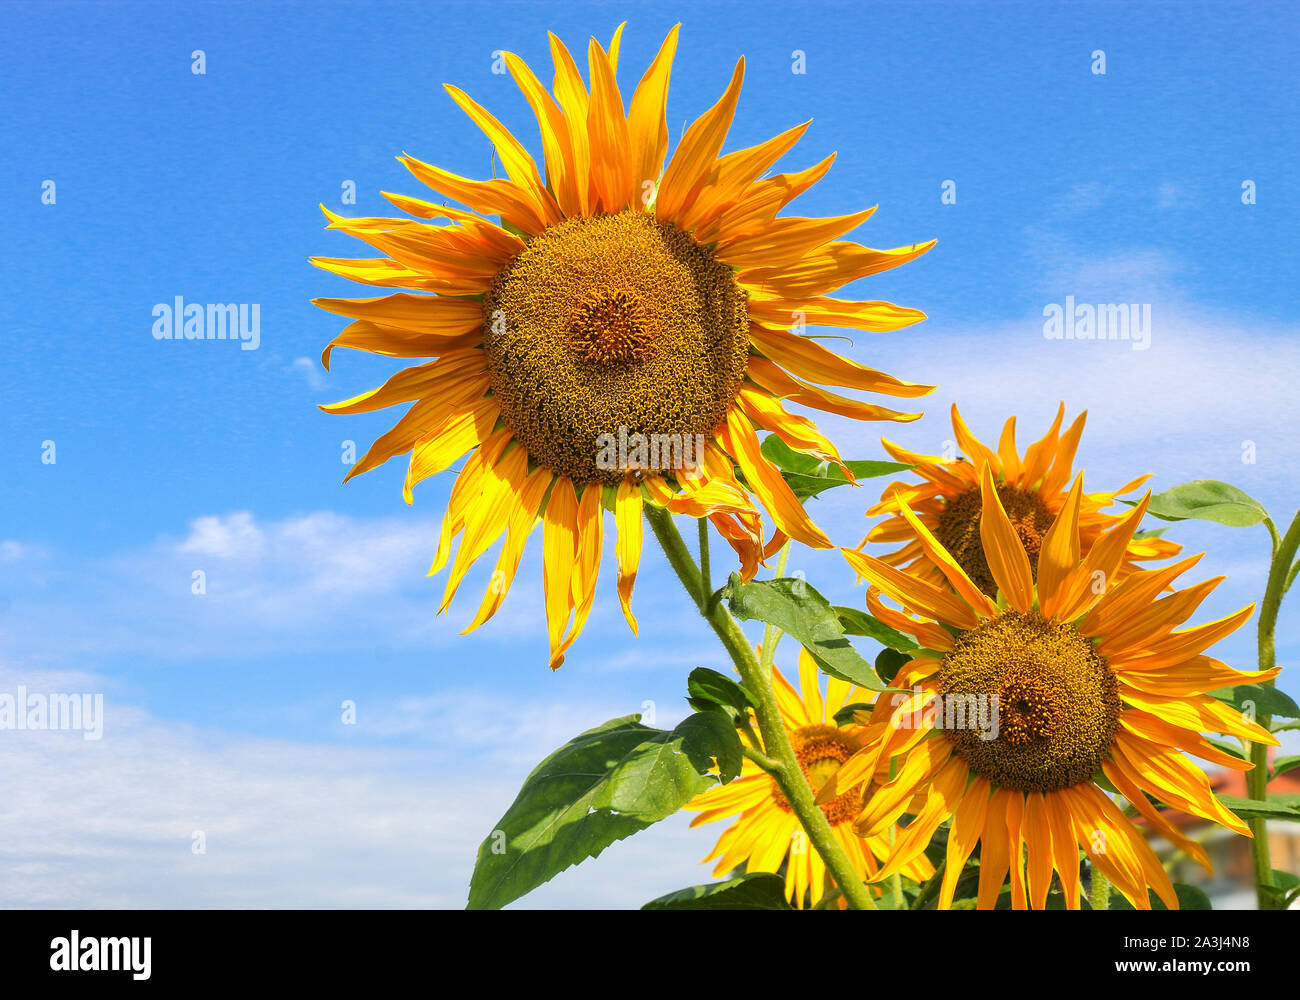 sunflower flowers againsat a blue sky with clouds Stock Photo